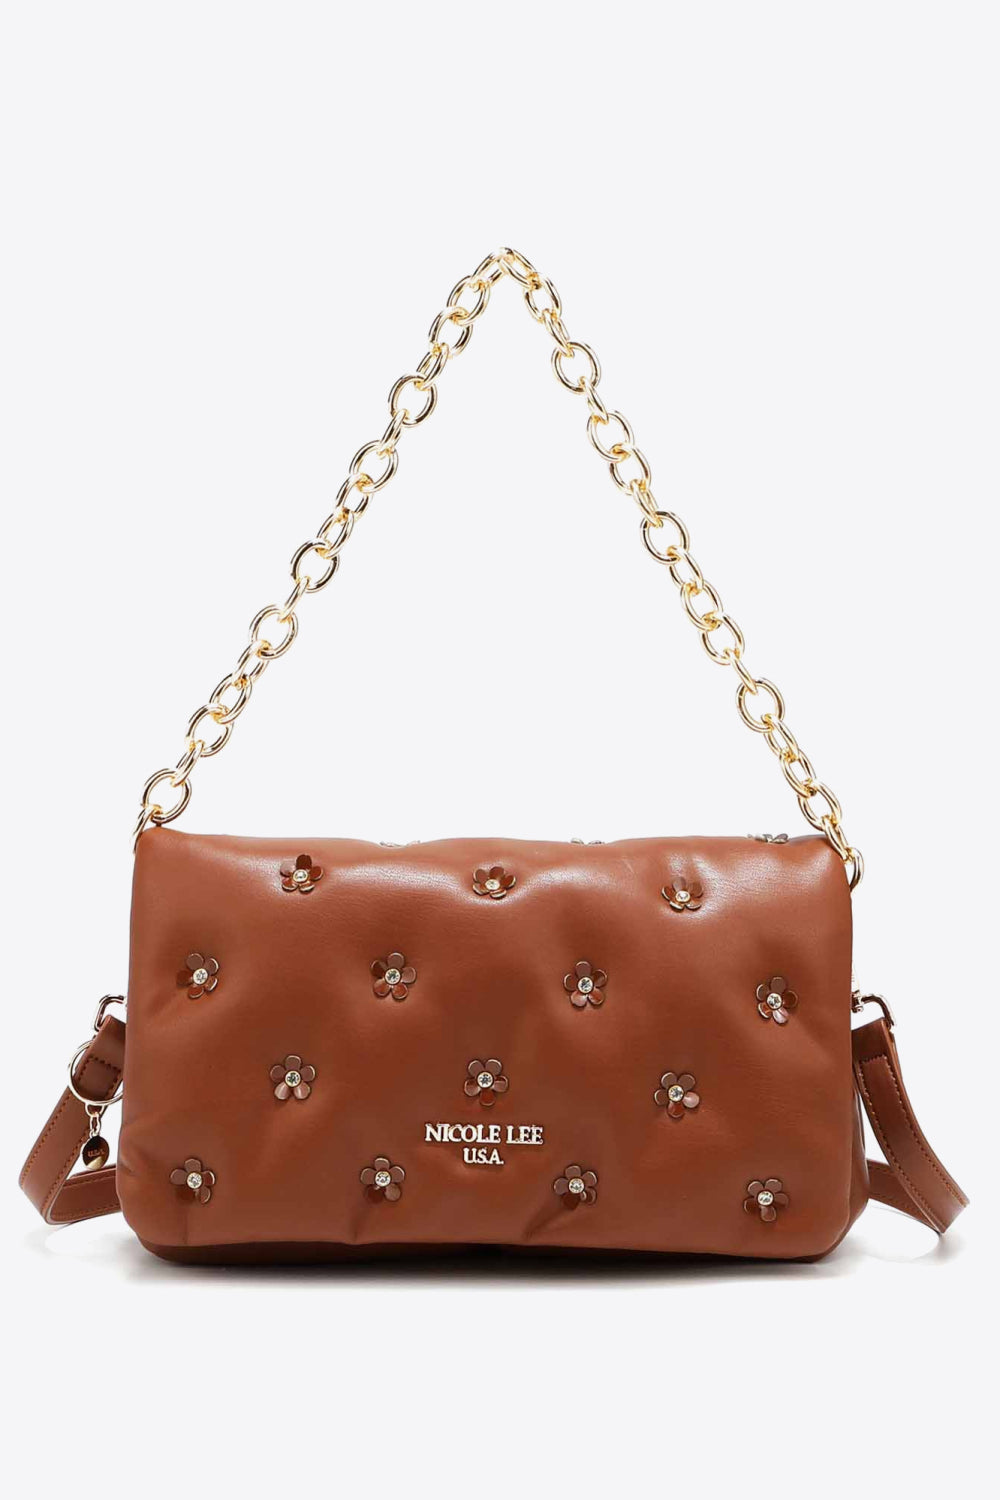 Nicole Lee USA Faux Leather Pouch - Online Only – My Pampered Life Seattle